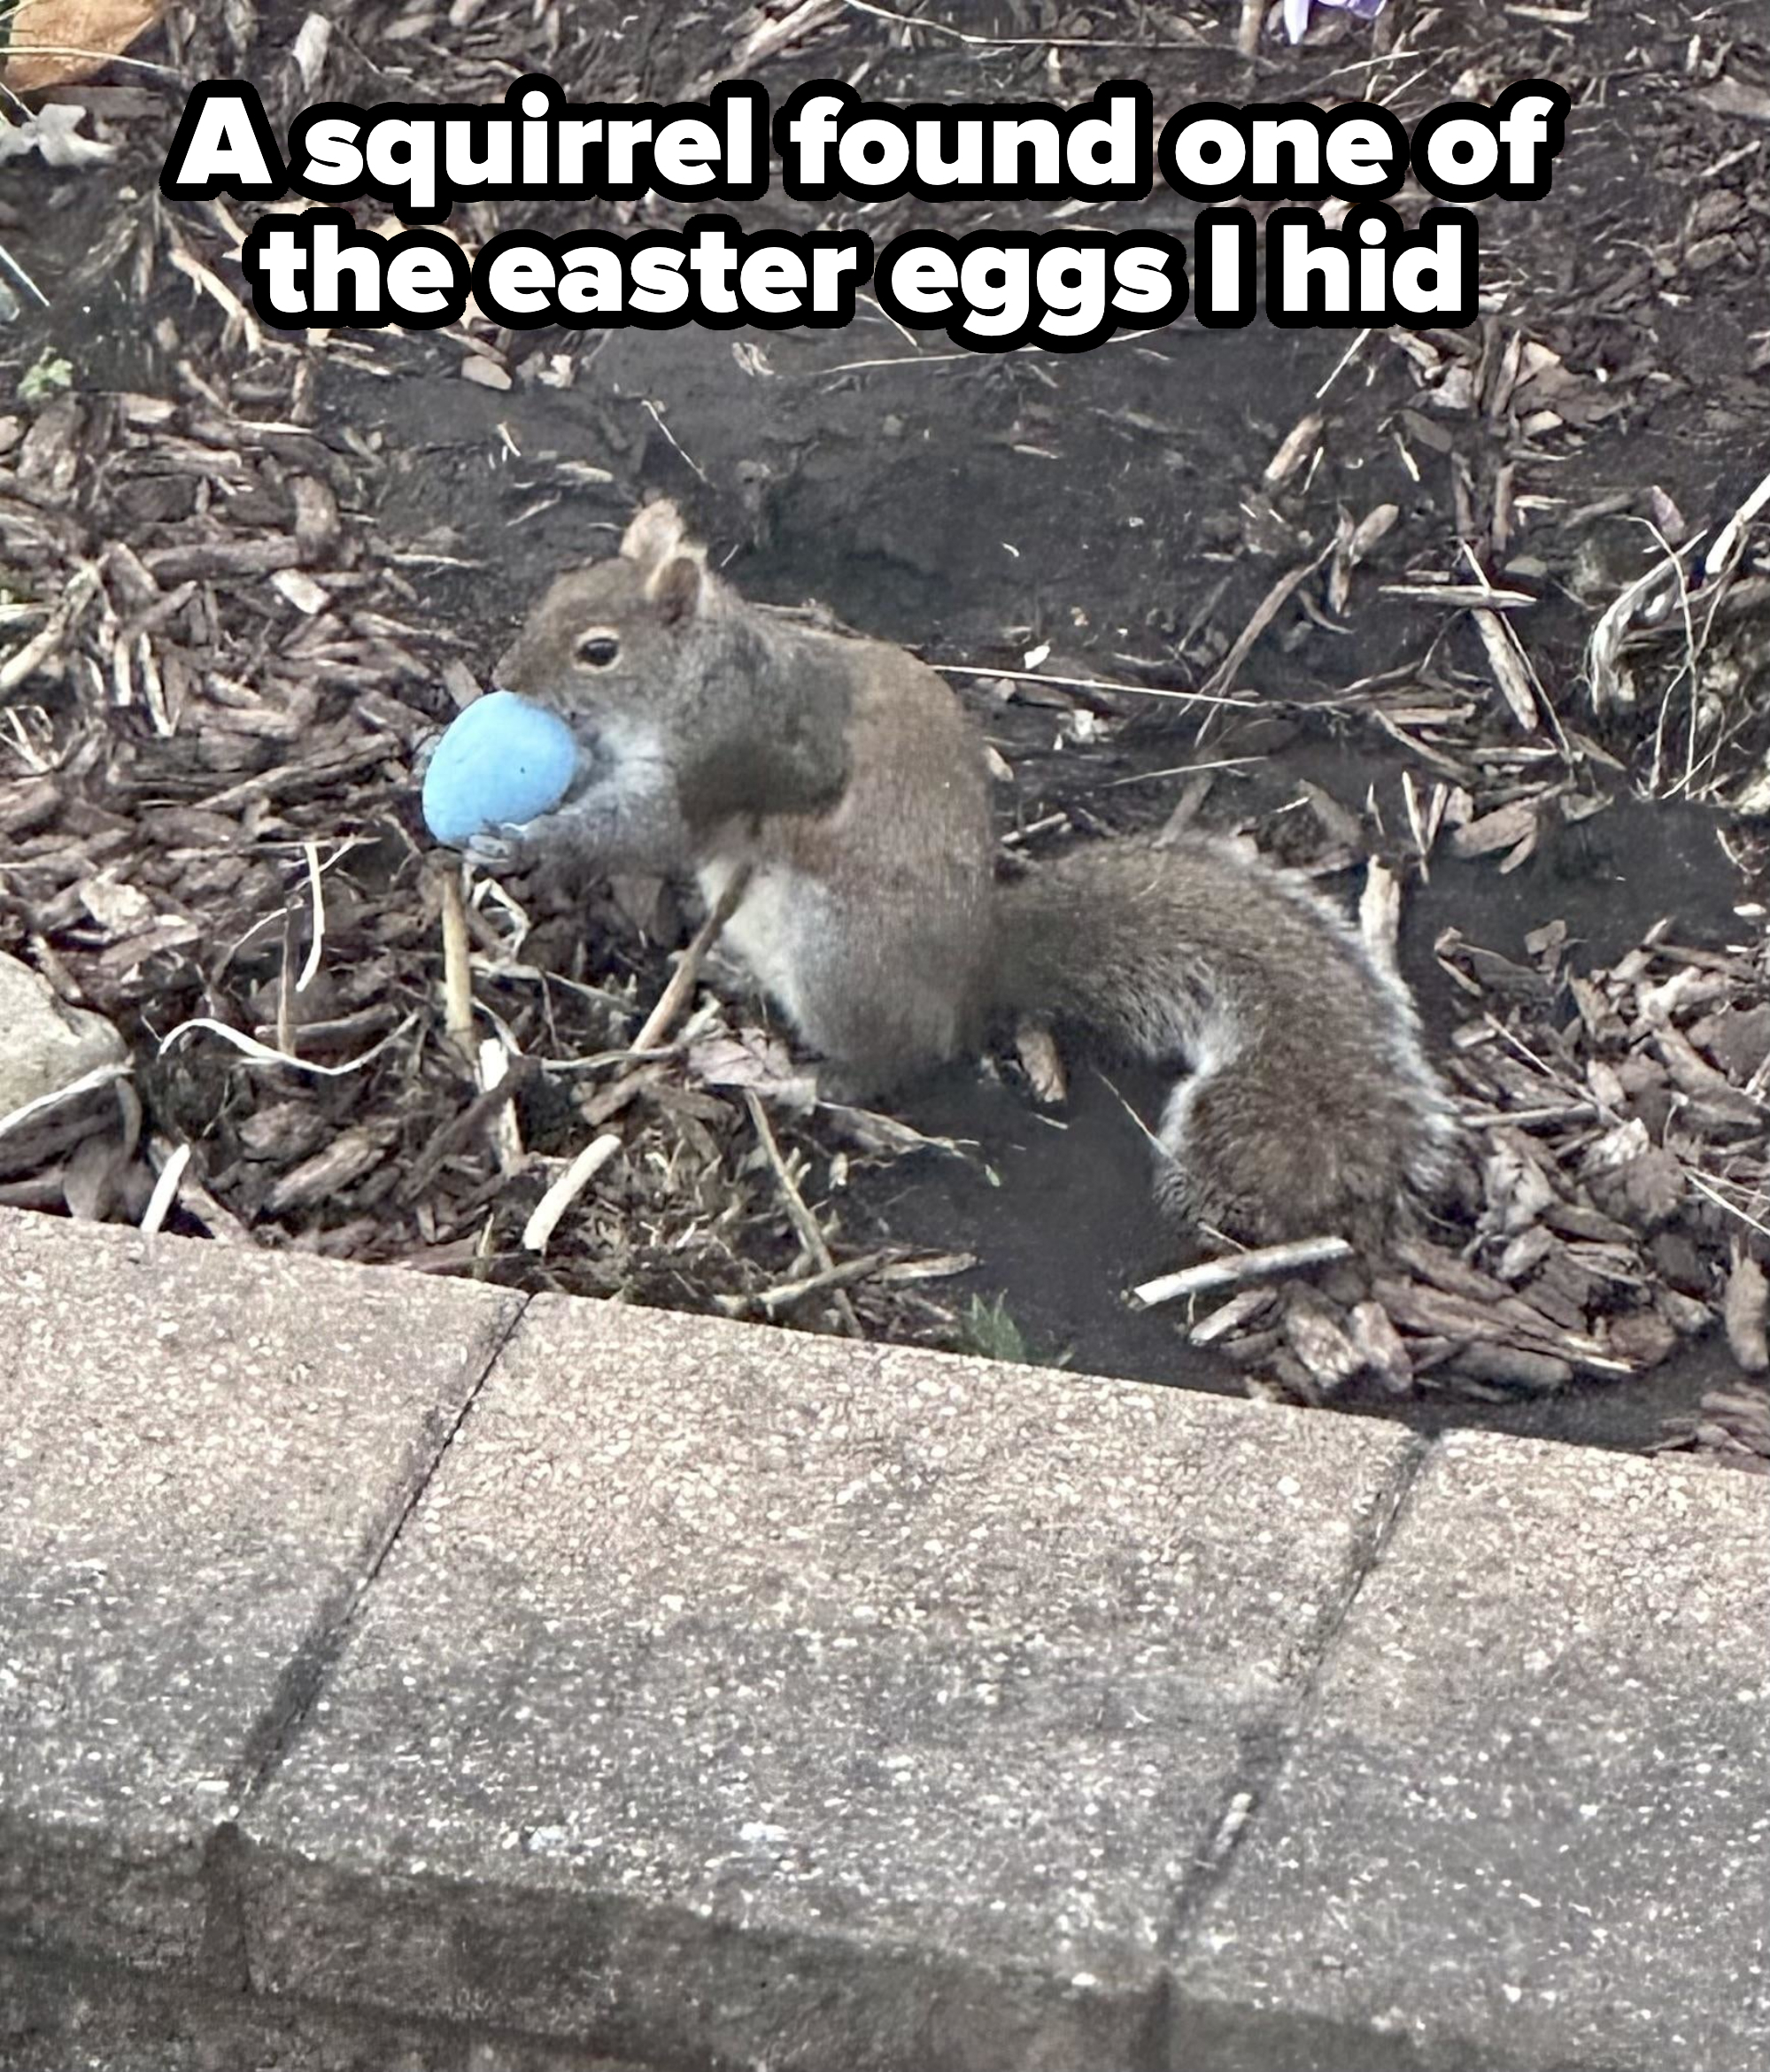 A squirrel holds an Easter egg in its mouth while standing in mulch